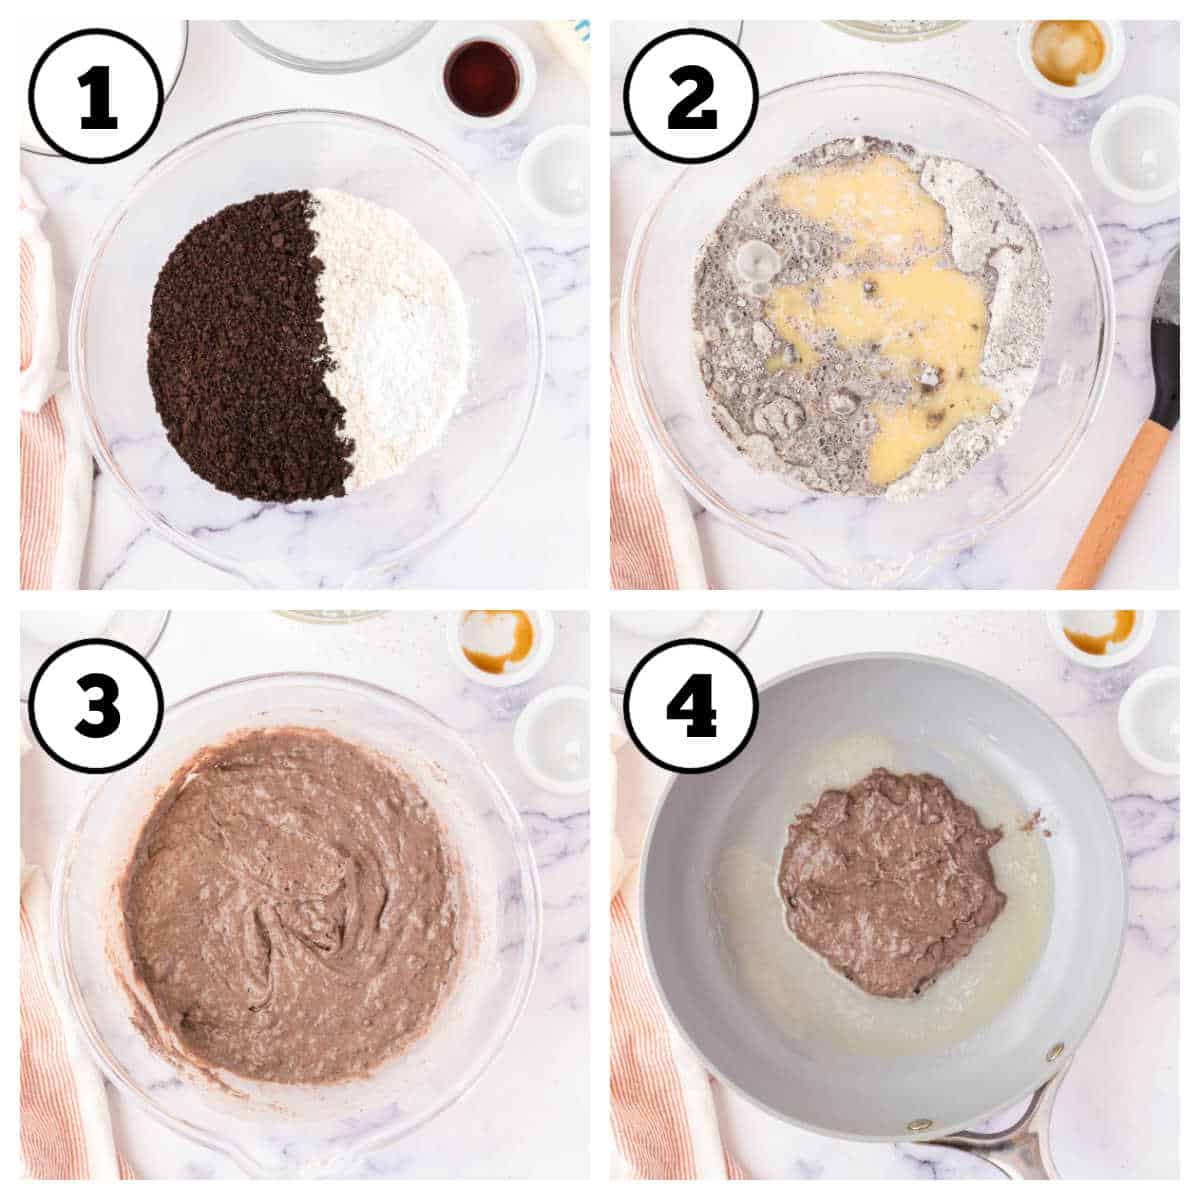 Steps 1-4 collage for making Oreo pancakes.